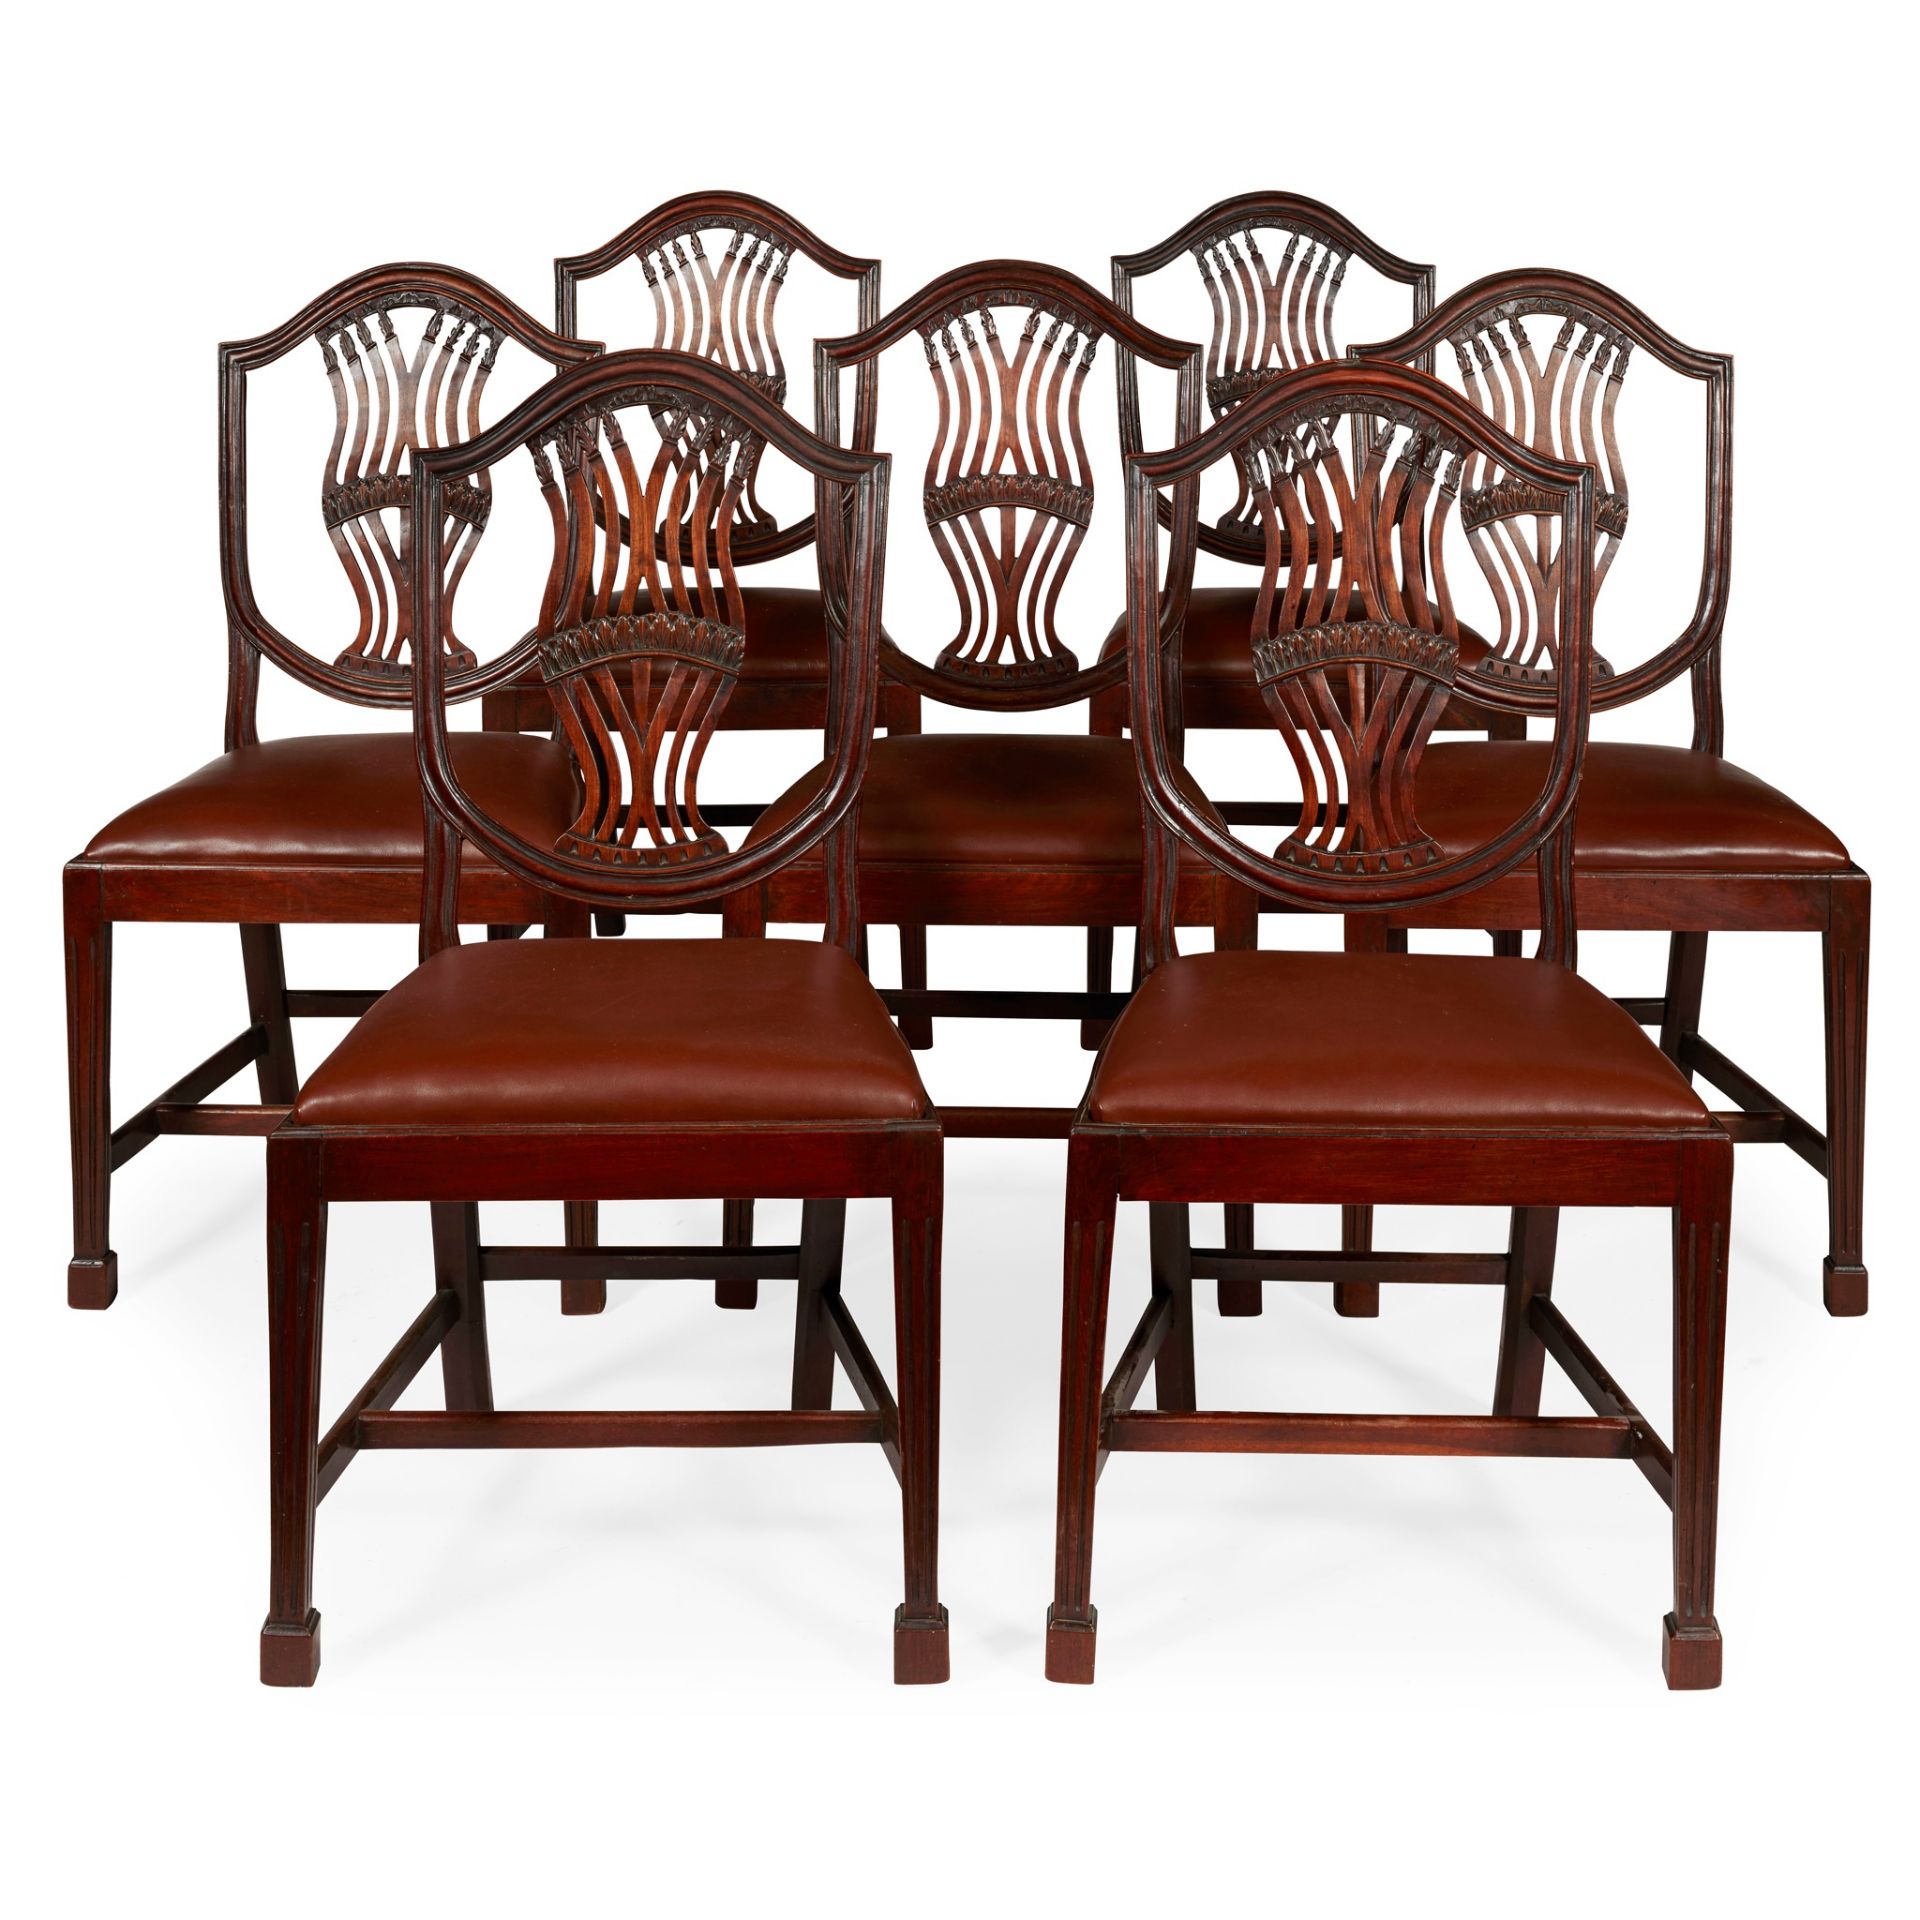 SET OF SEVEN LATE GEORGIAN MAHOGANY DINING CHAIRS LATE 18TH CENTURY